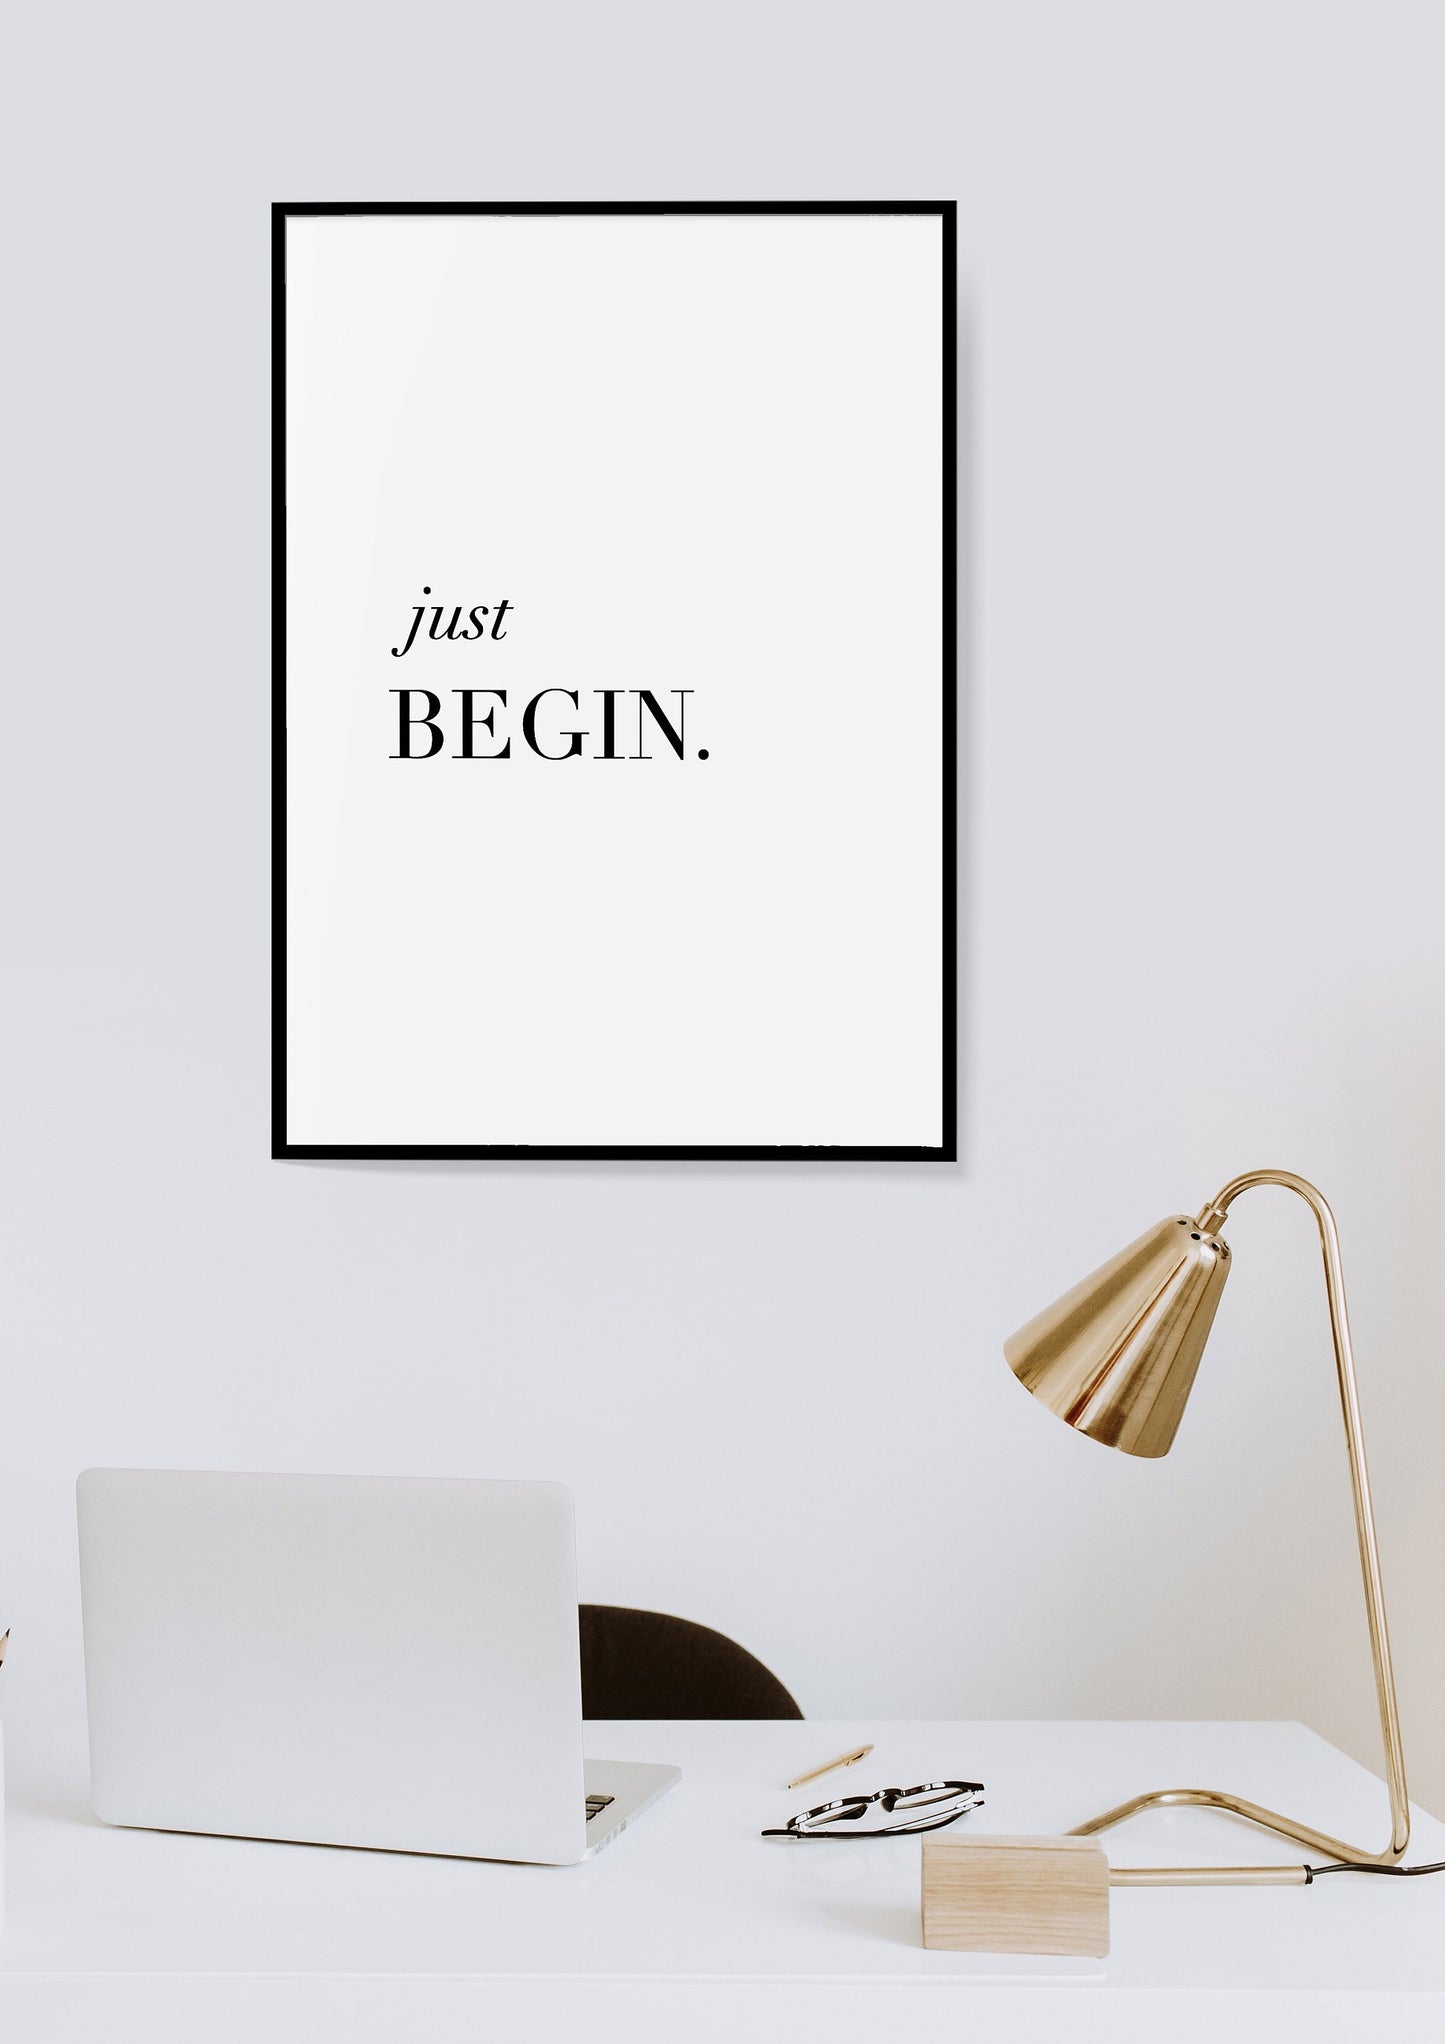 Just begin, Inspirational Wall Art, Motivational Wall Decor, Office Decor, Typography Quote, Black and White Home Decor, Minimalist Print